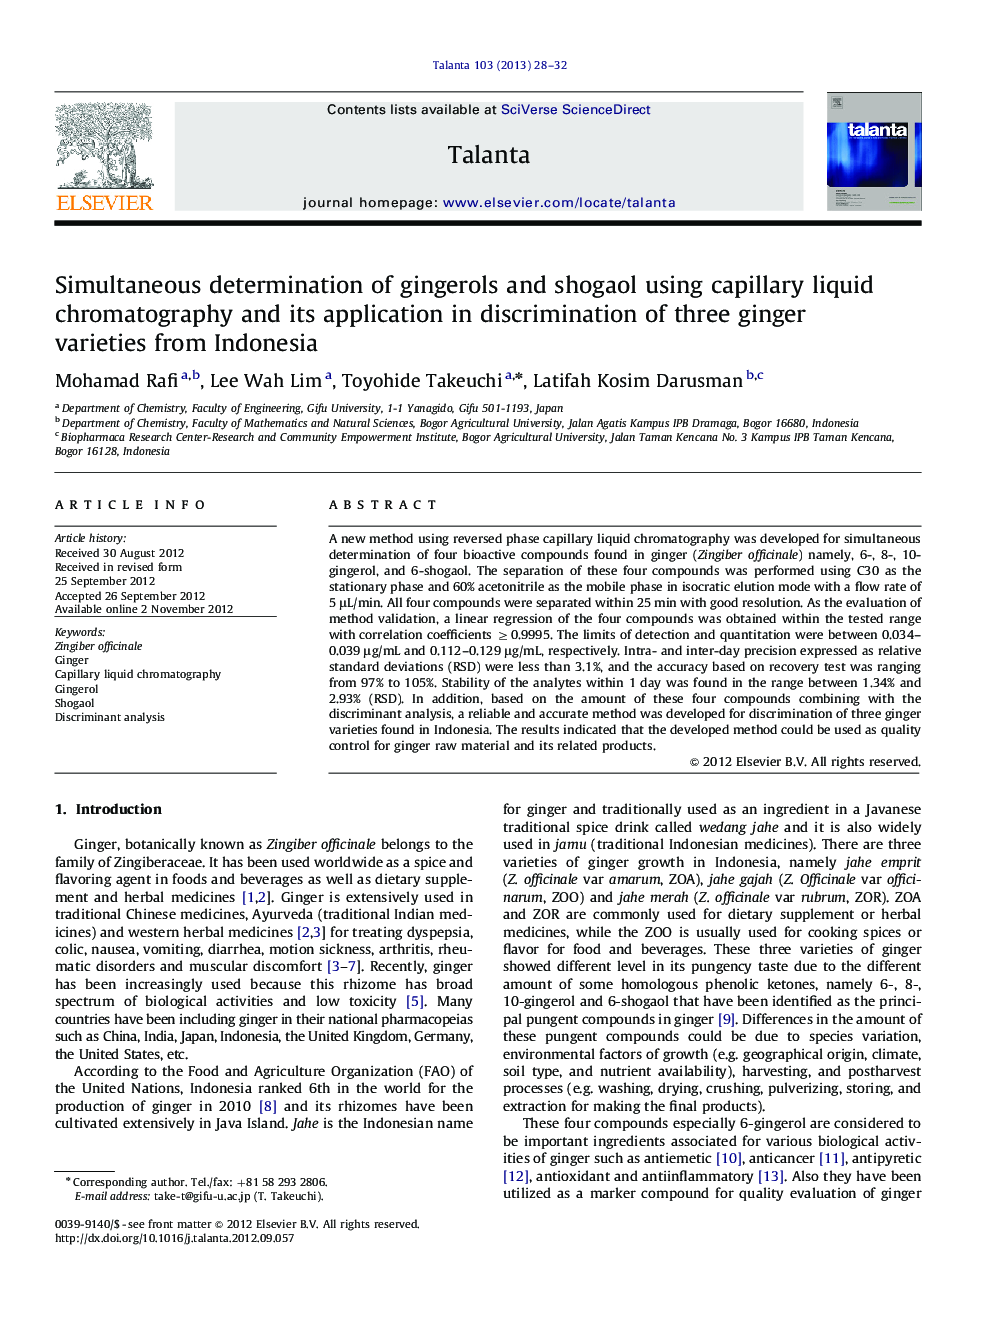 Simultaneous determination of gingerols and shogaol using capillary liquid chromatography and its application in discrimination of three ginger varieties from Indonesia